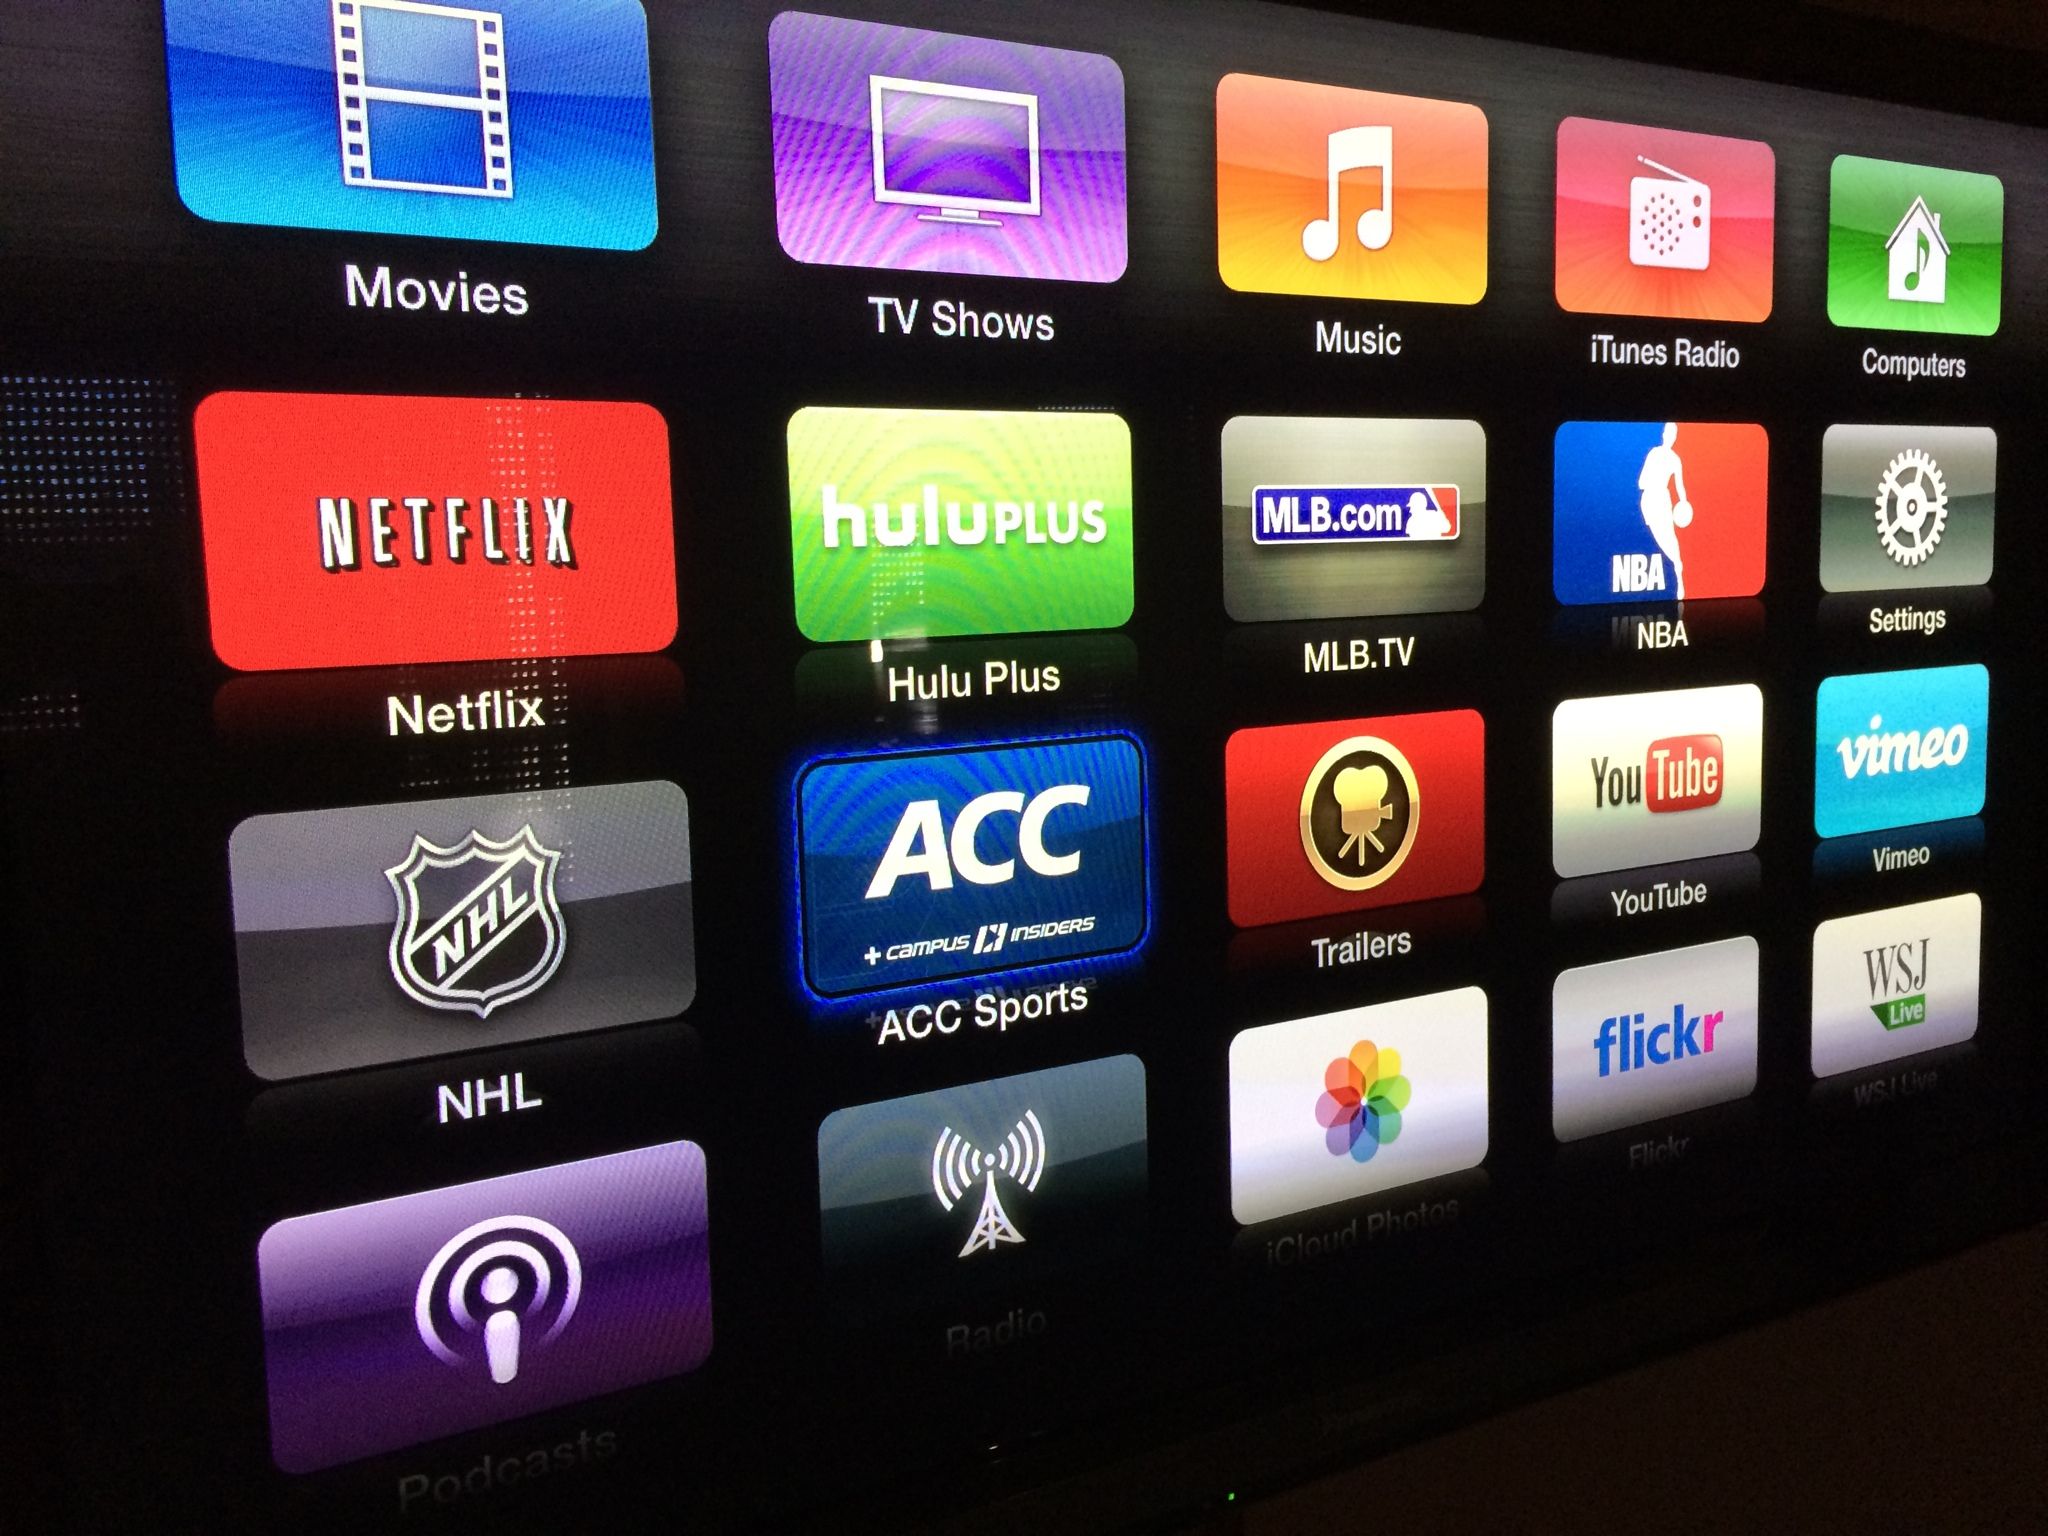 ACC Sports channel added to Apple TV